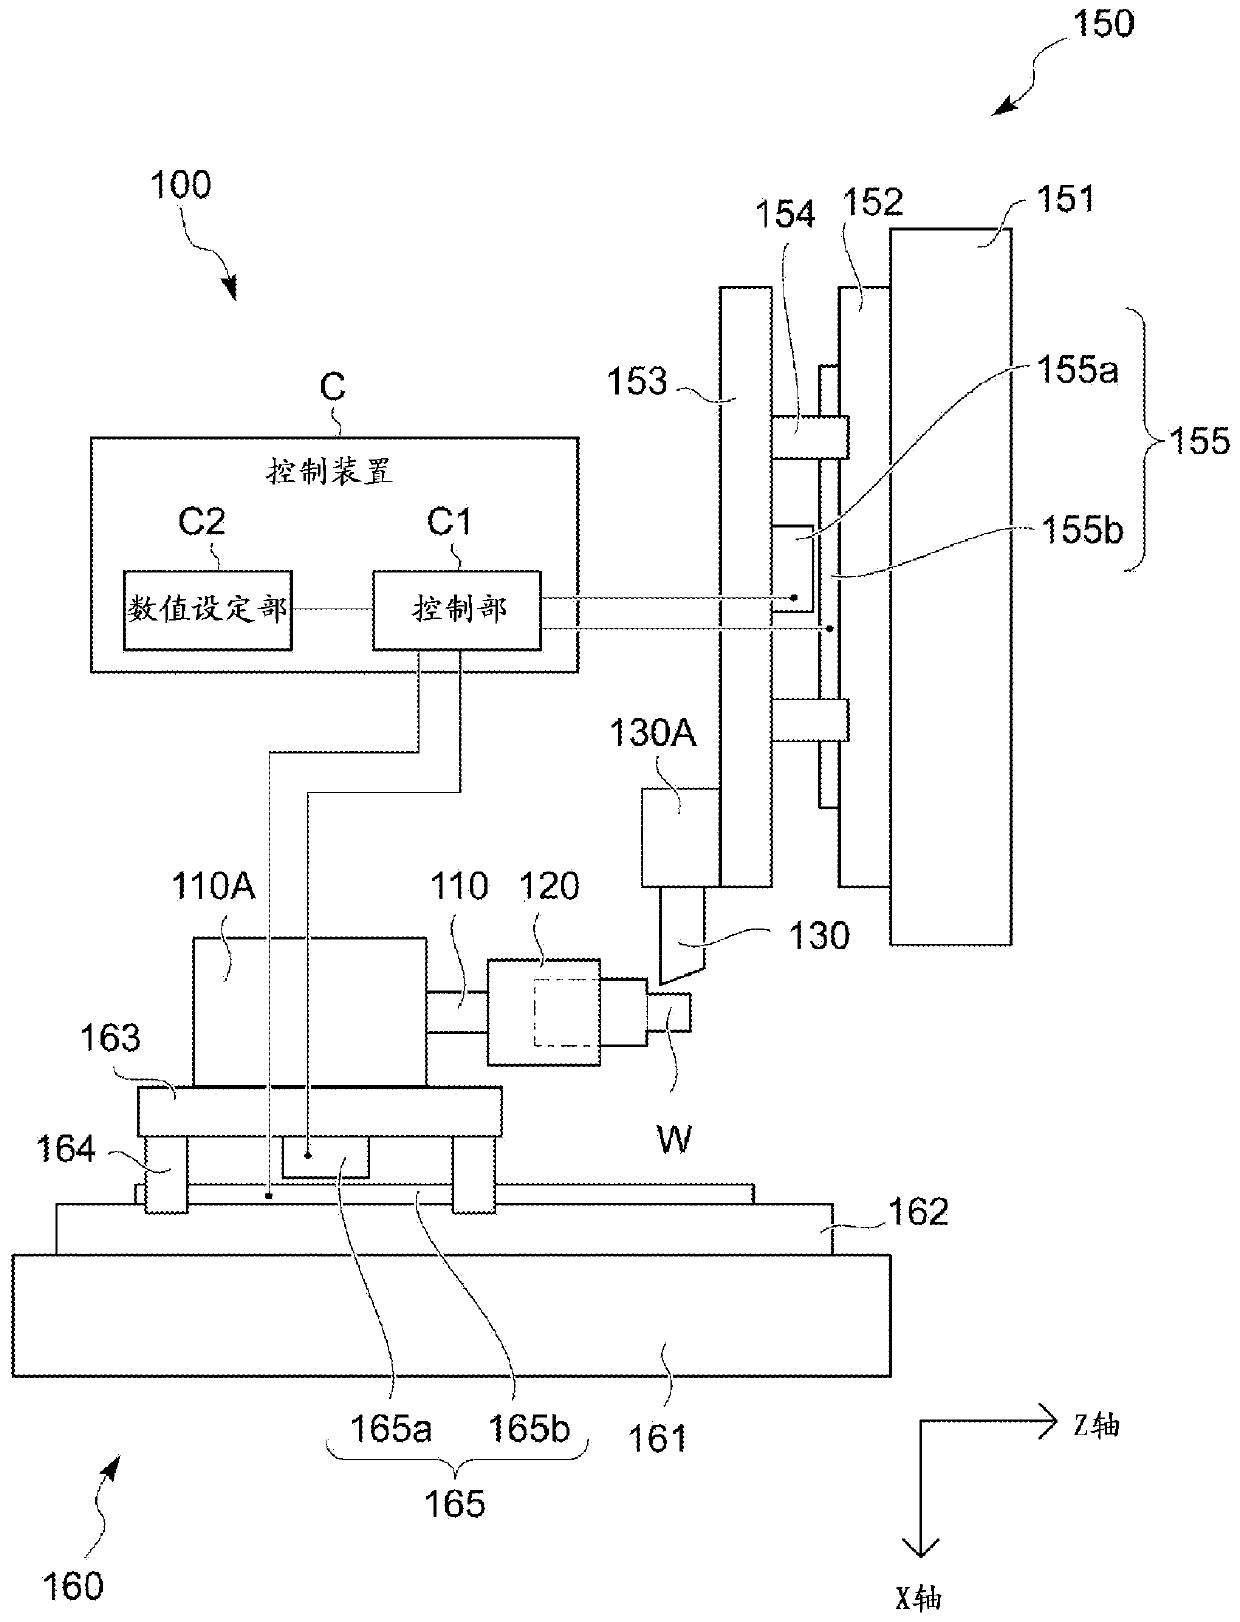 Control device for machine tool, and machine tool provided with said control device